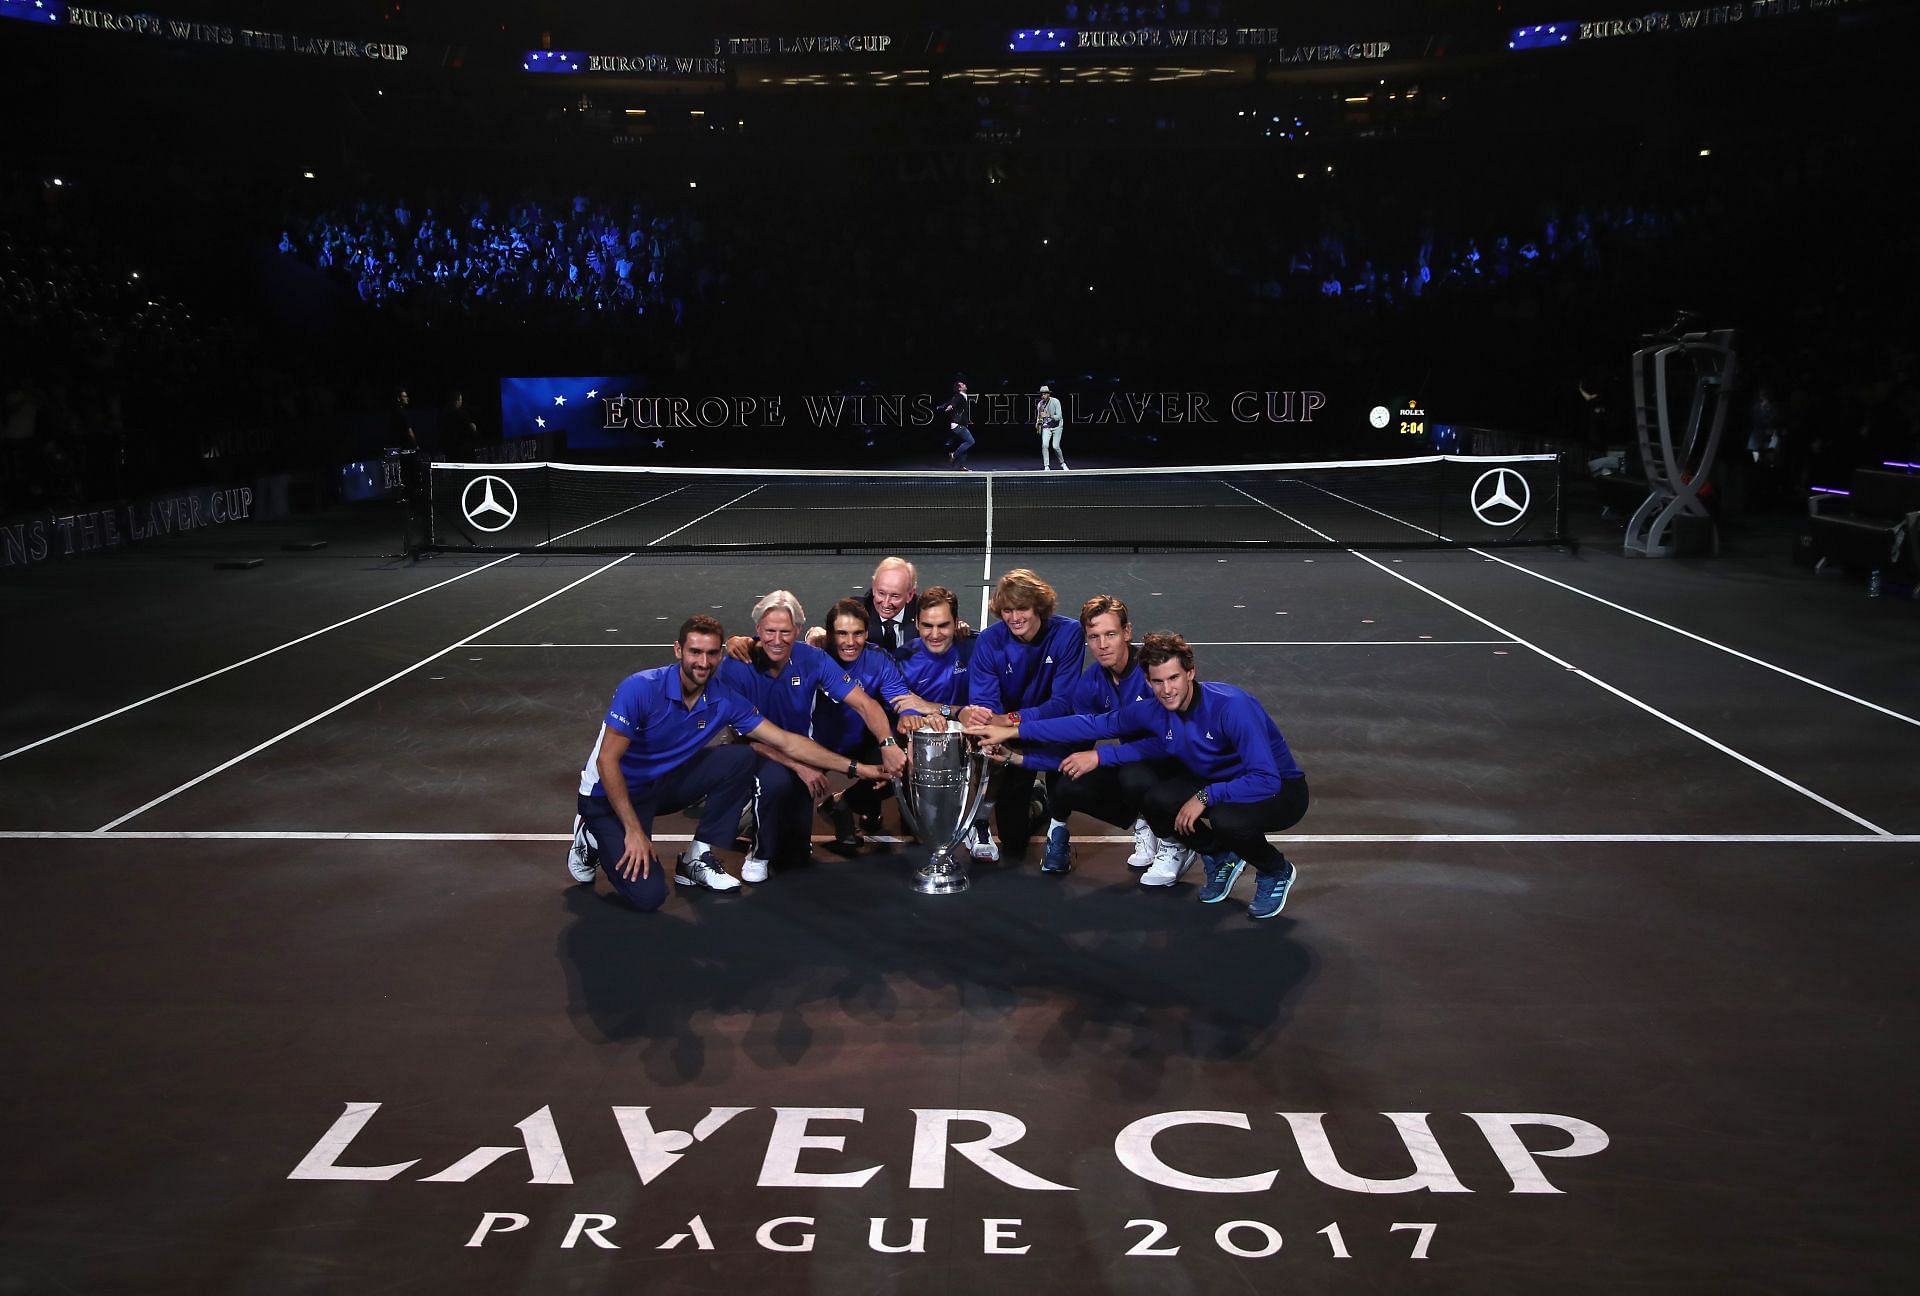 Team Europe have won the trophy four times to date.